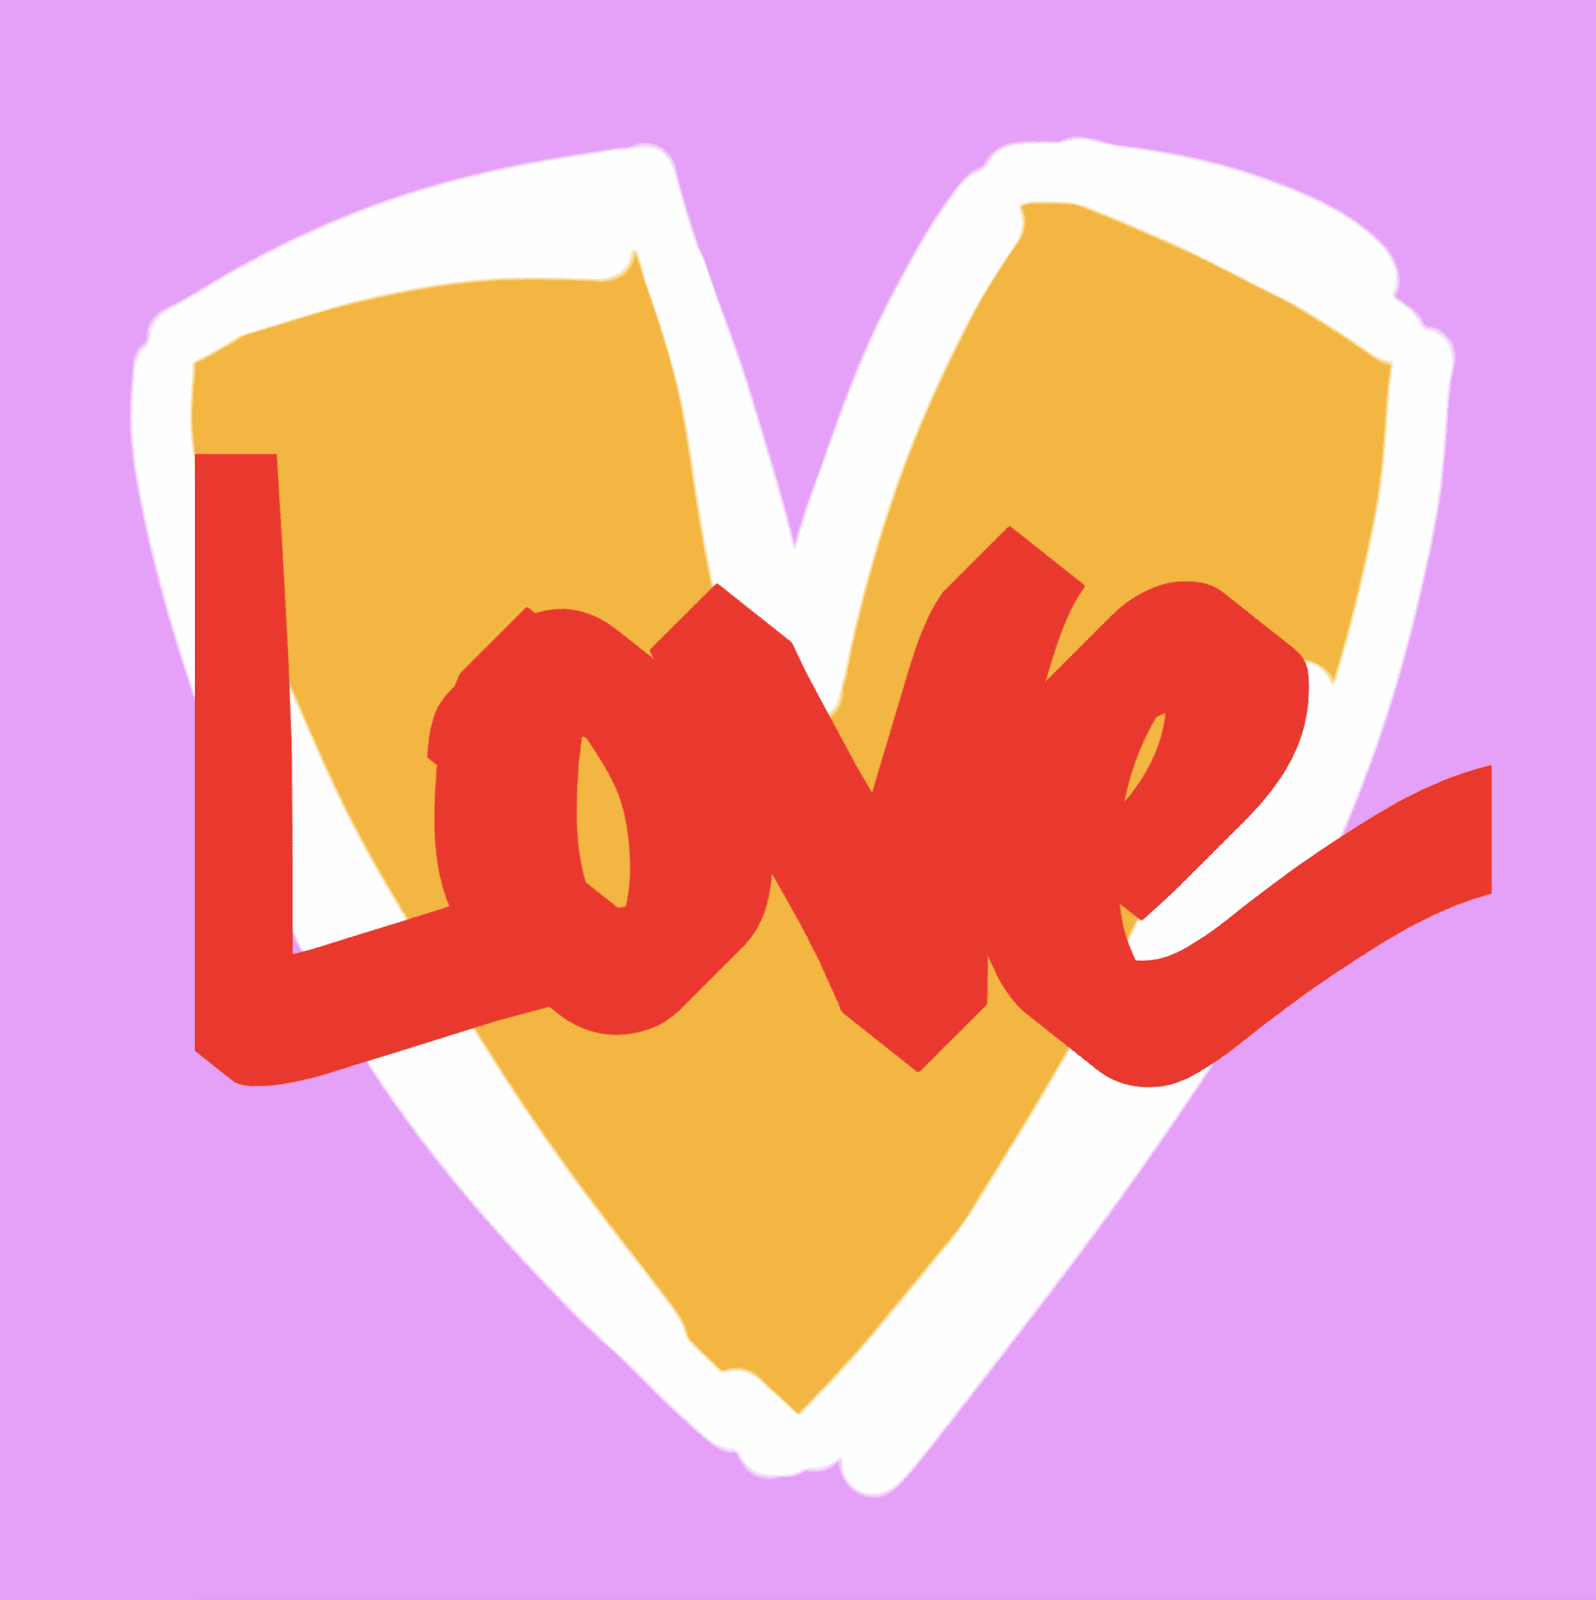 Love Heart - Pink 50 x 50 cm edition of 10 $2,232 [approx £1,800]